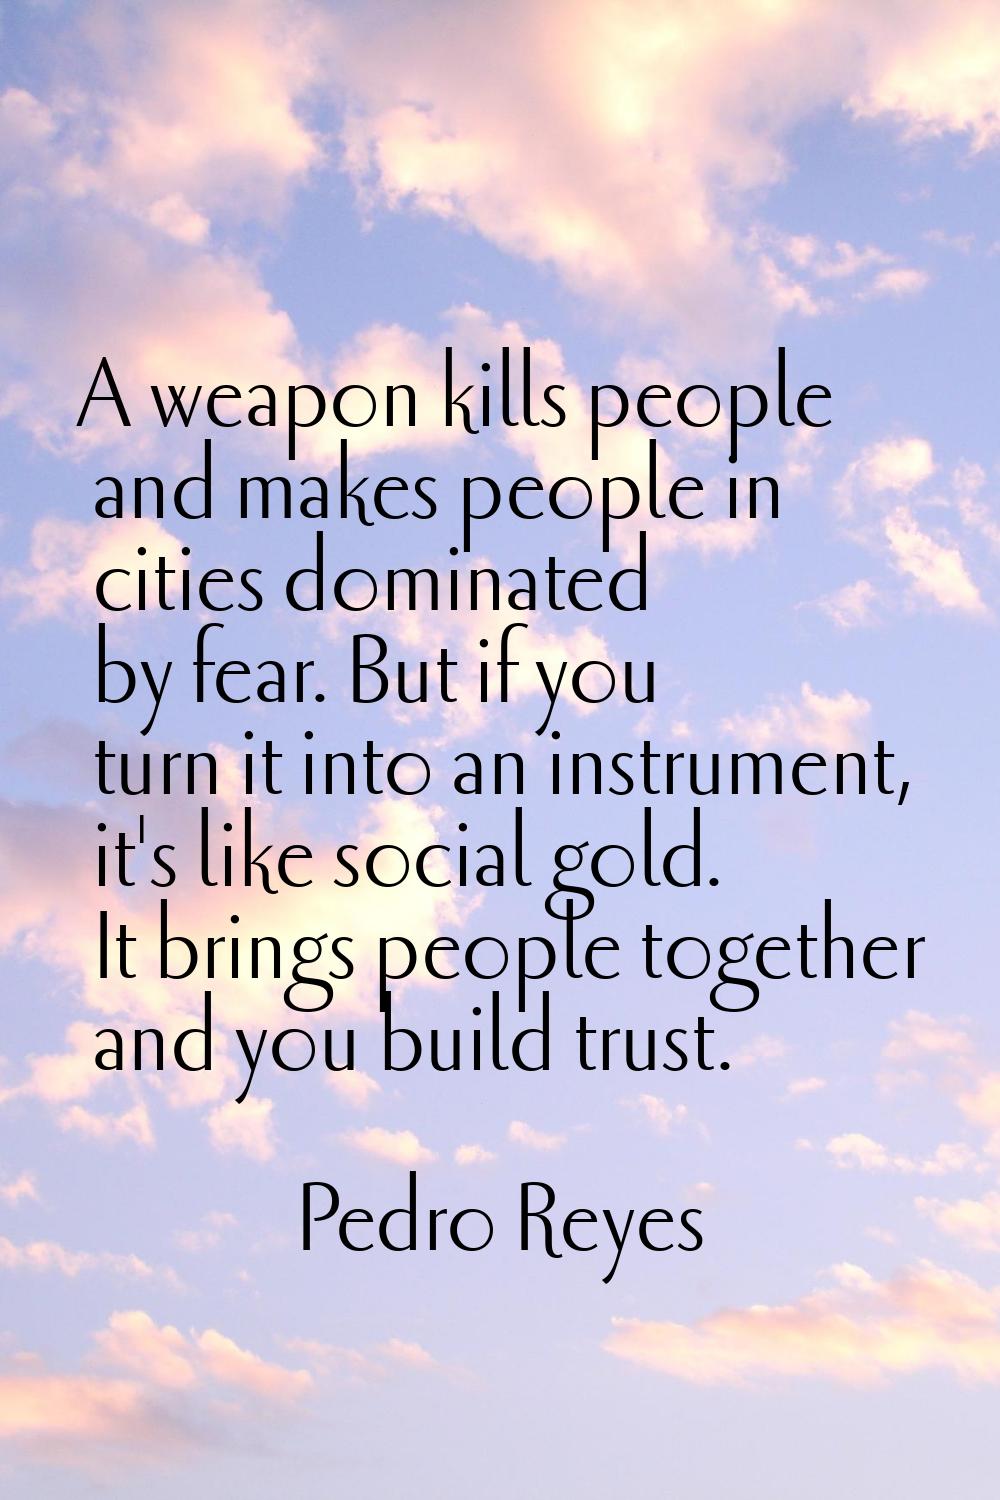 A weapon kills people and makes people in cities dominated by fear. But if you turn it into an inst